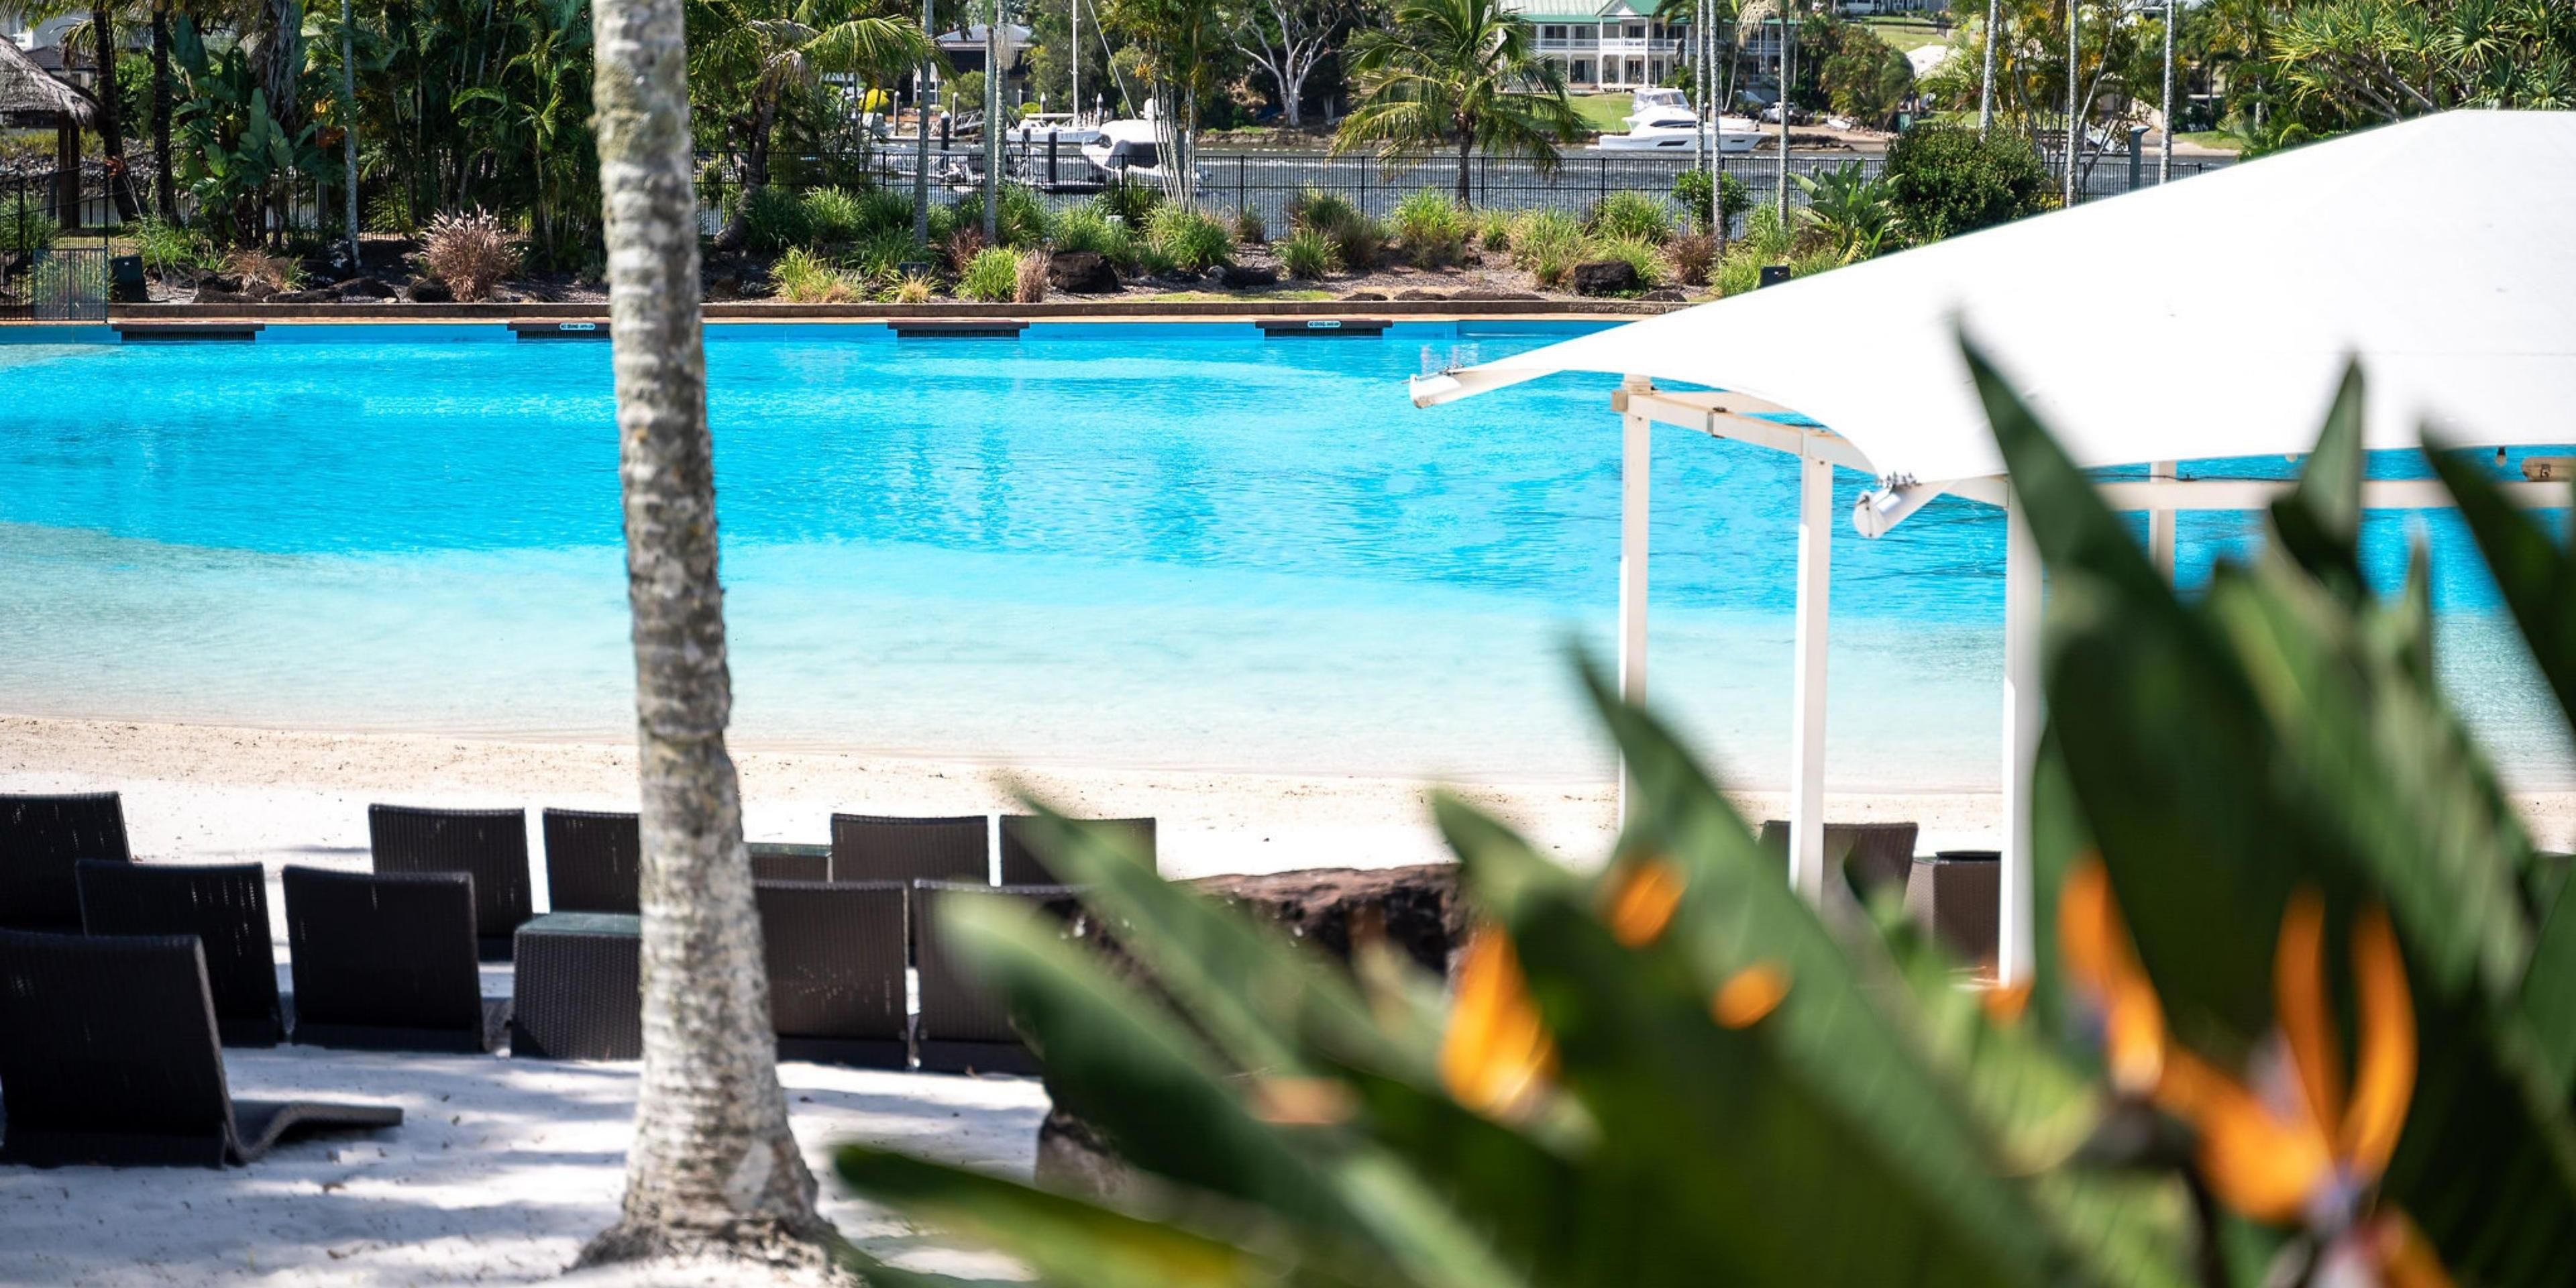 Experience the sea and the sand without stepping foot off the resort. Our saltwater Lagoon Beach, set within a subtropical garden lined with palm trees, expands over one acre. Nearby, the Coomera River serves as a natural backdrop to the pristine blue hues of the lagoon's crystal-like water. 